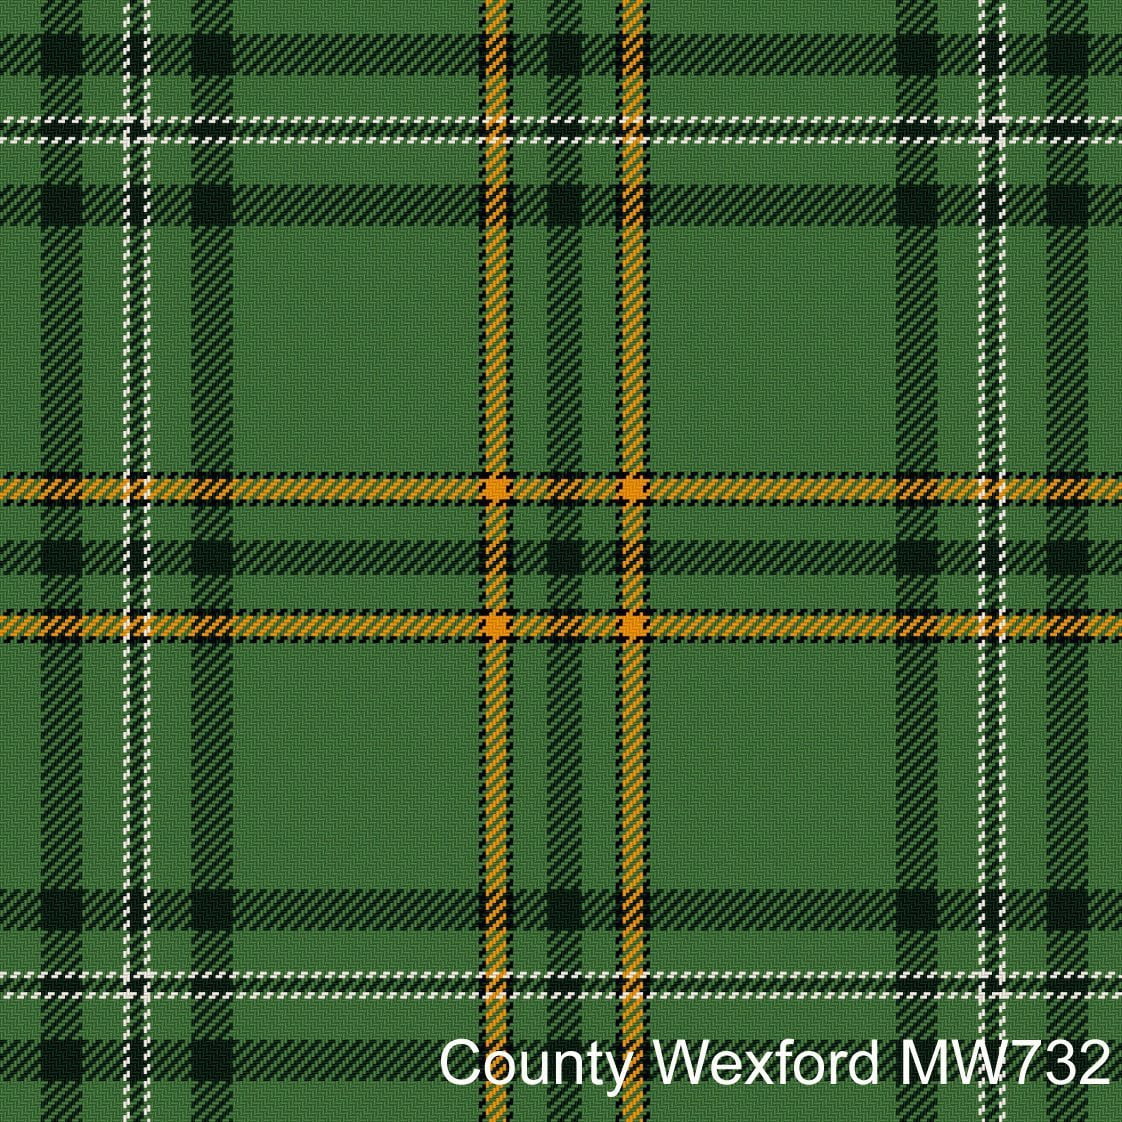 Wexford County